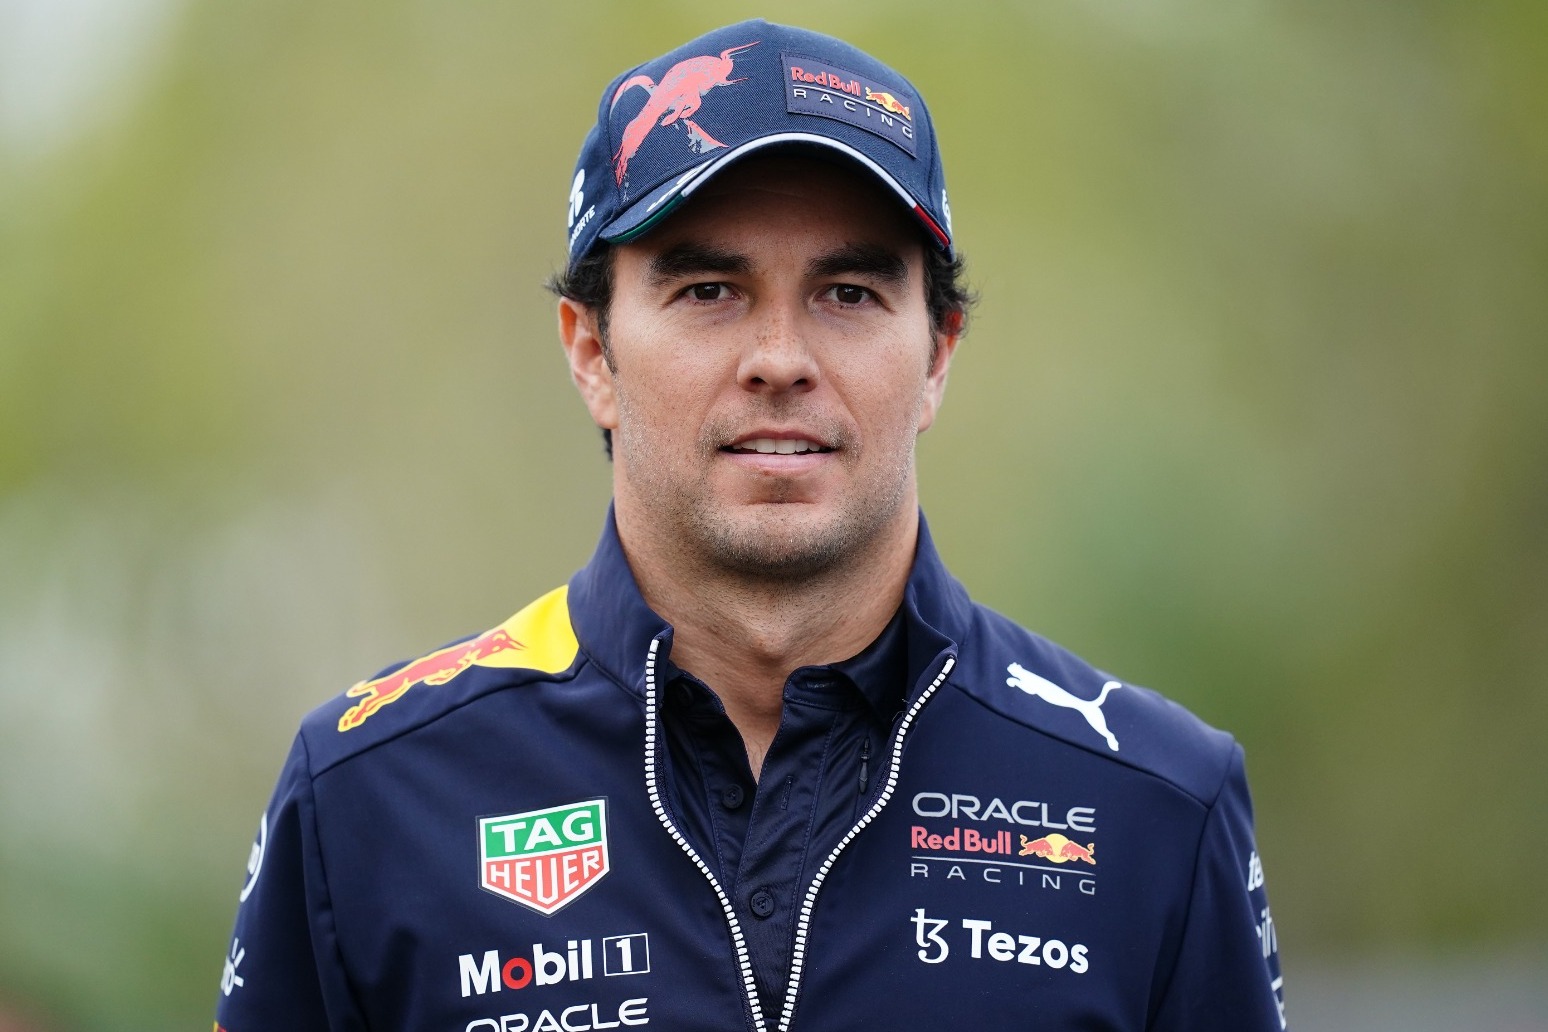 Sergio Perez follows up Monaco Grand Prix win with new two-year Red Bull deal 